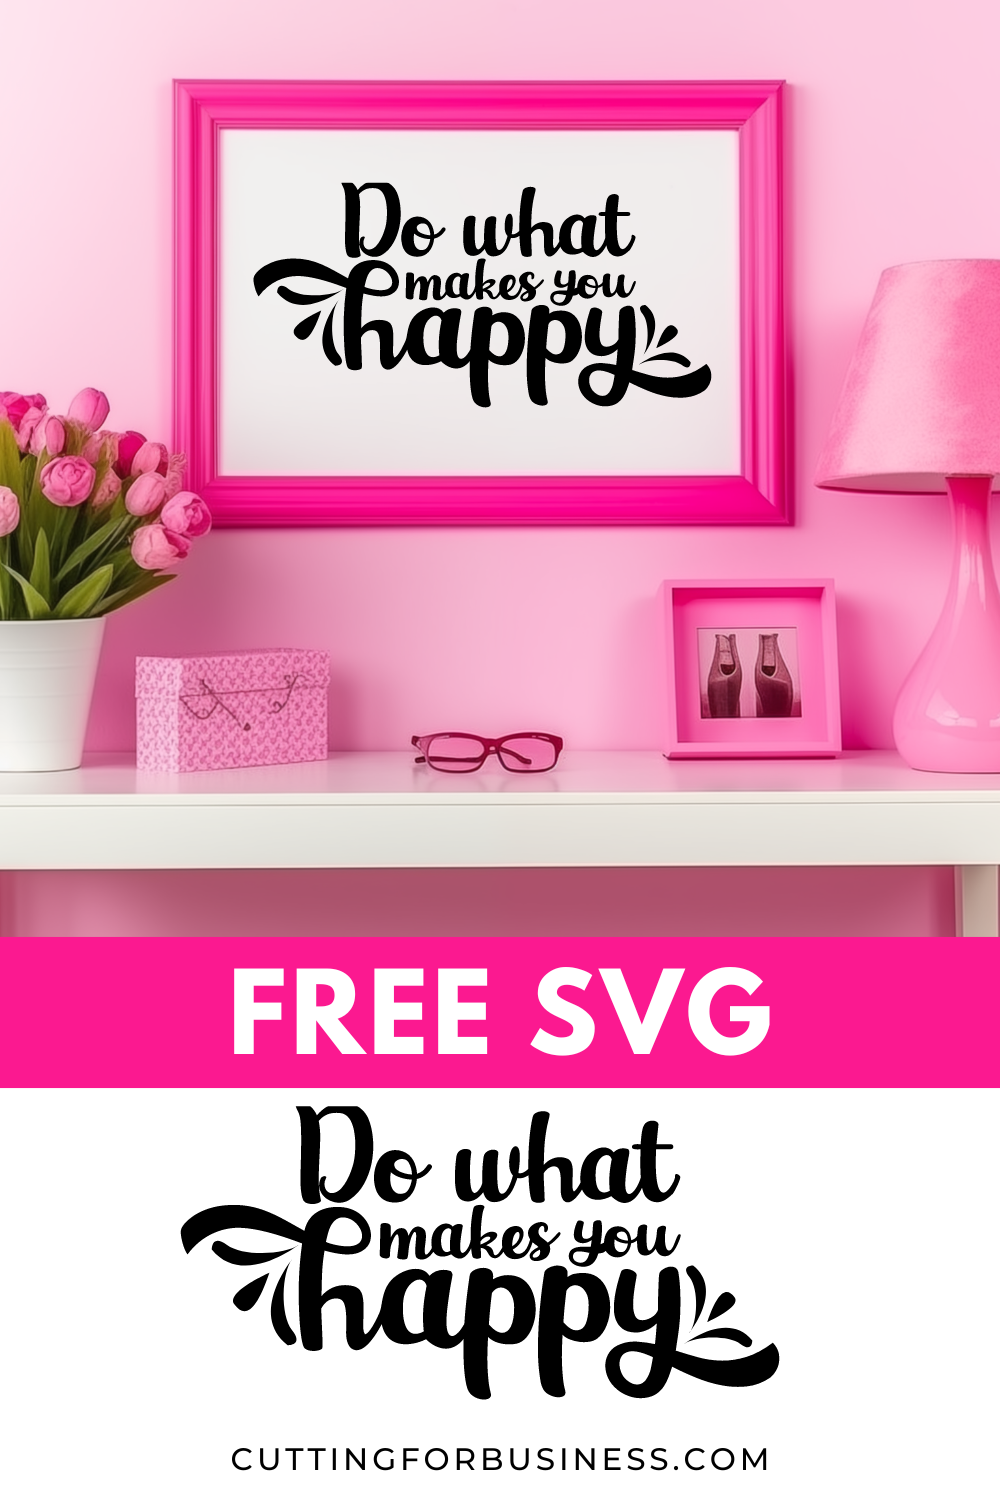 Free Motivational SVG - Do What Makes You Happy - cuttingforbusiness.com